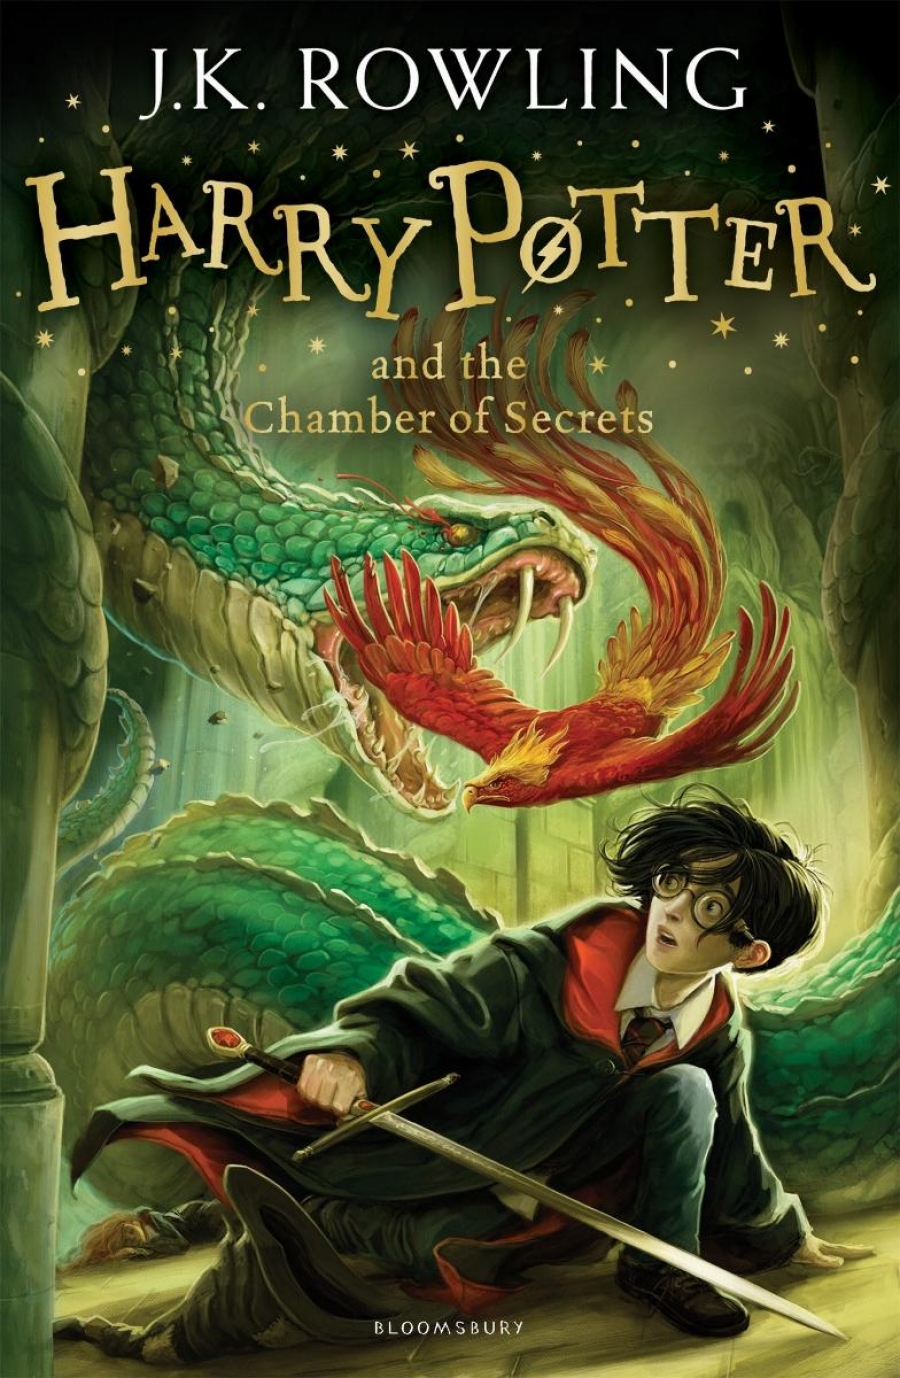 J. K. Rowling Harry Potter and the Chamber of Secrets (Book 2) - Hardcover 